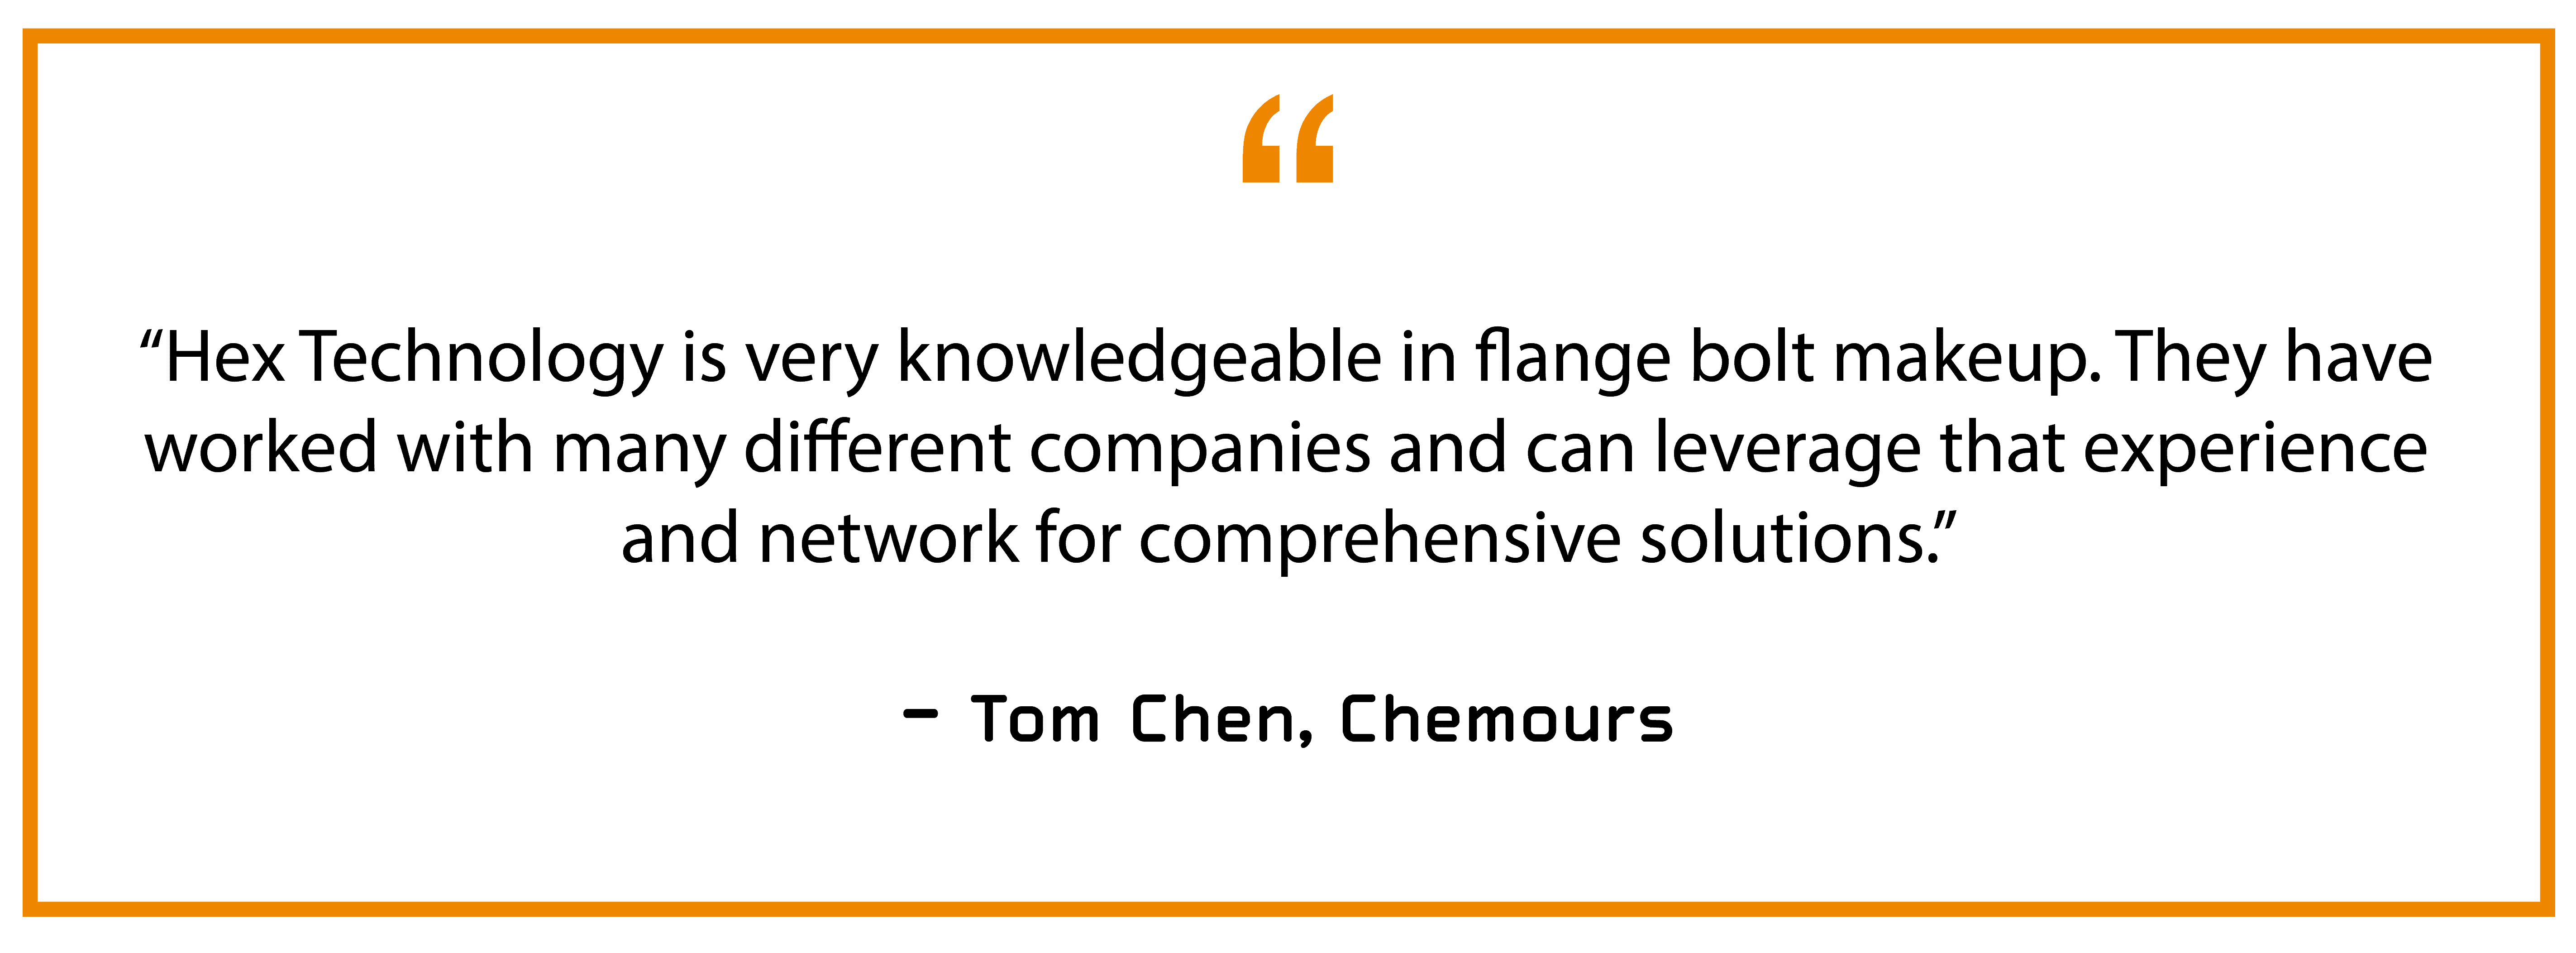 “Hex Technology is very knowledgeable in flange bolt makeup. They have worked with many different companies and can leverage that experience and network for comprehensive solutions.” — Tom Chen, Chemours